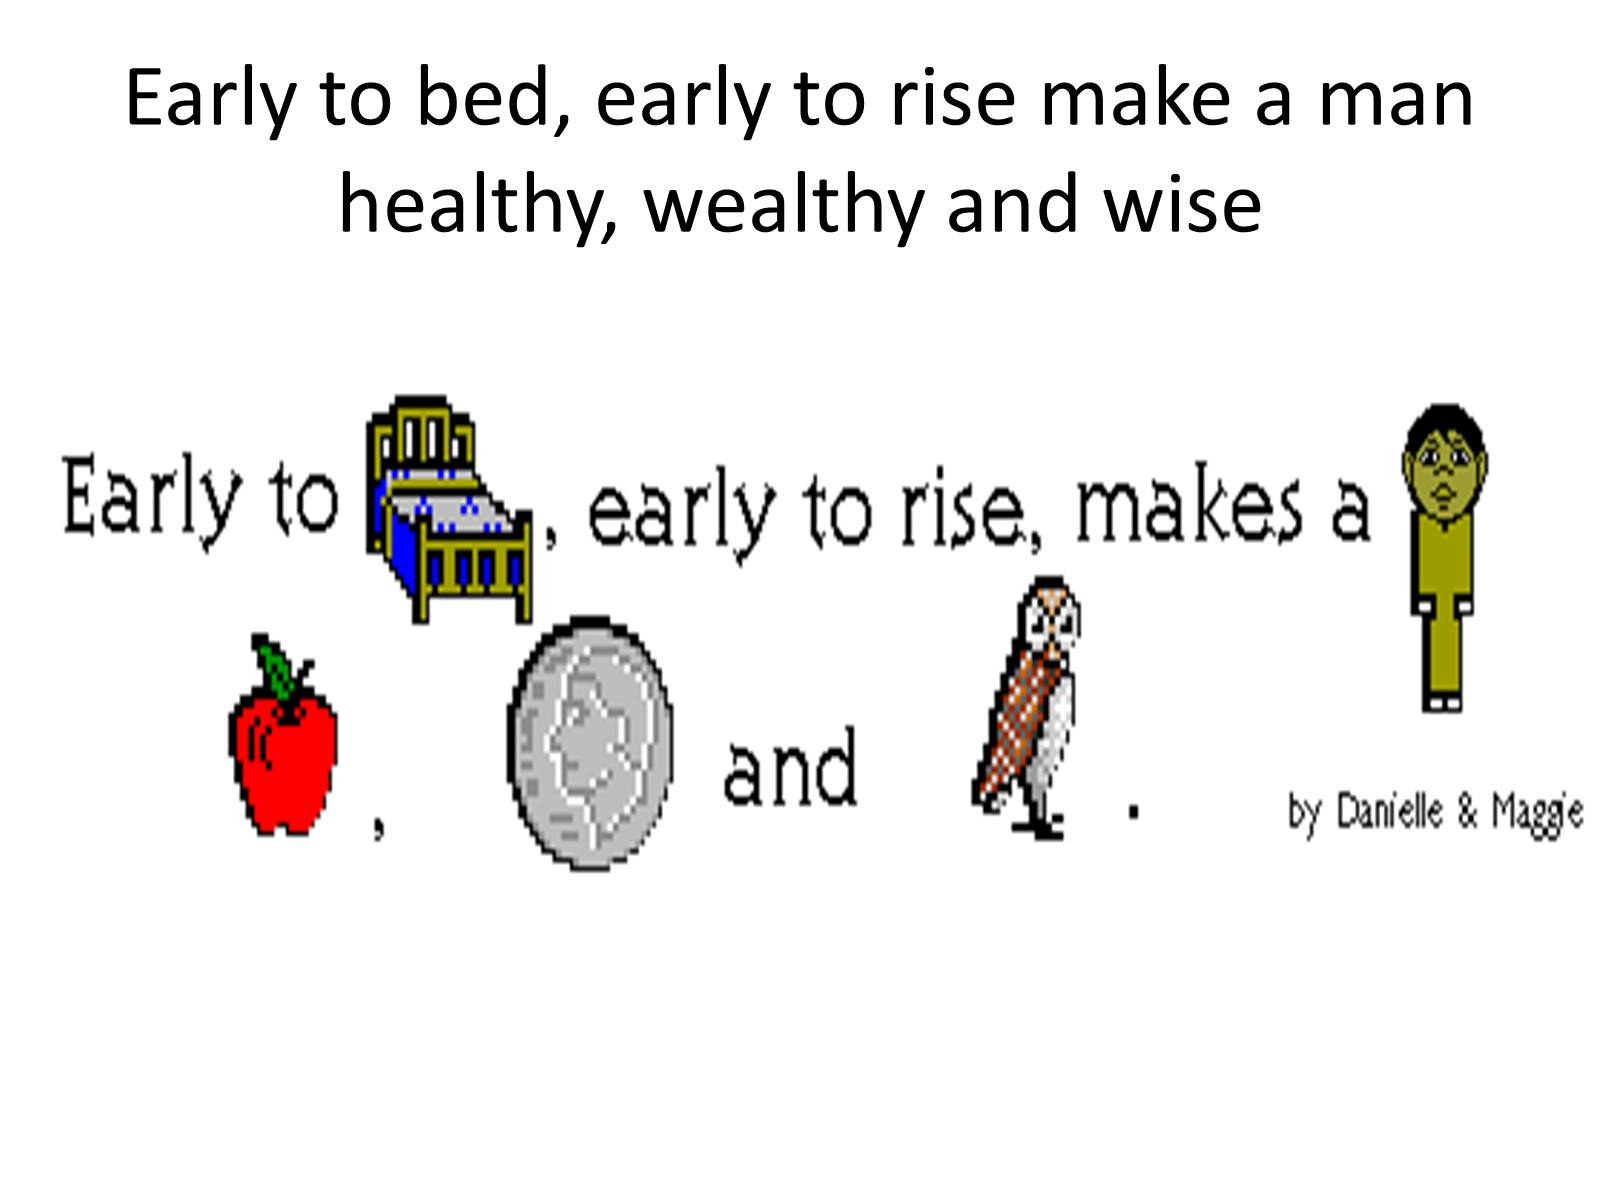 Early перевести на русский. Early to Bed and early to Rise makes a man healthy wealthy and Wise. Early to Bed and early to Rise makes a man healthy wealthy and Wise перевод. Early to Bed and early to Rise makes. Early to Bed and early to Rise makes a man healthy, wealthy and Wise картинка.